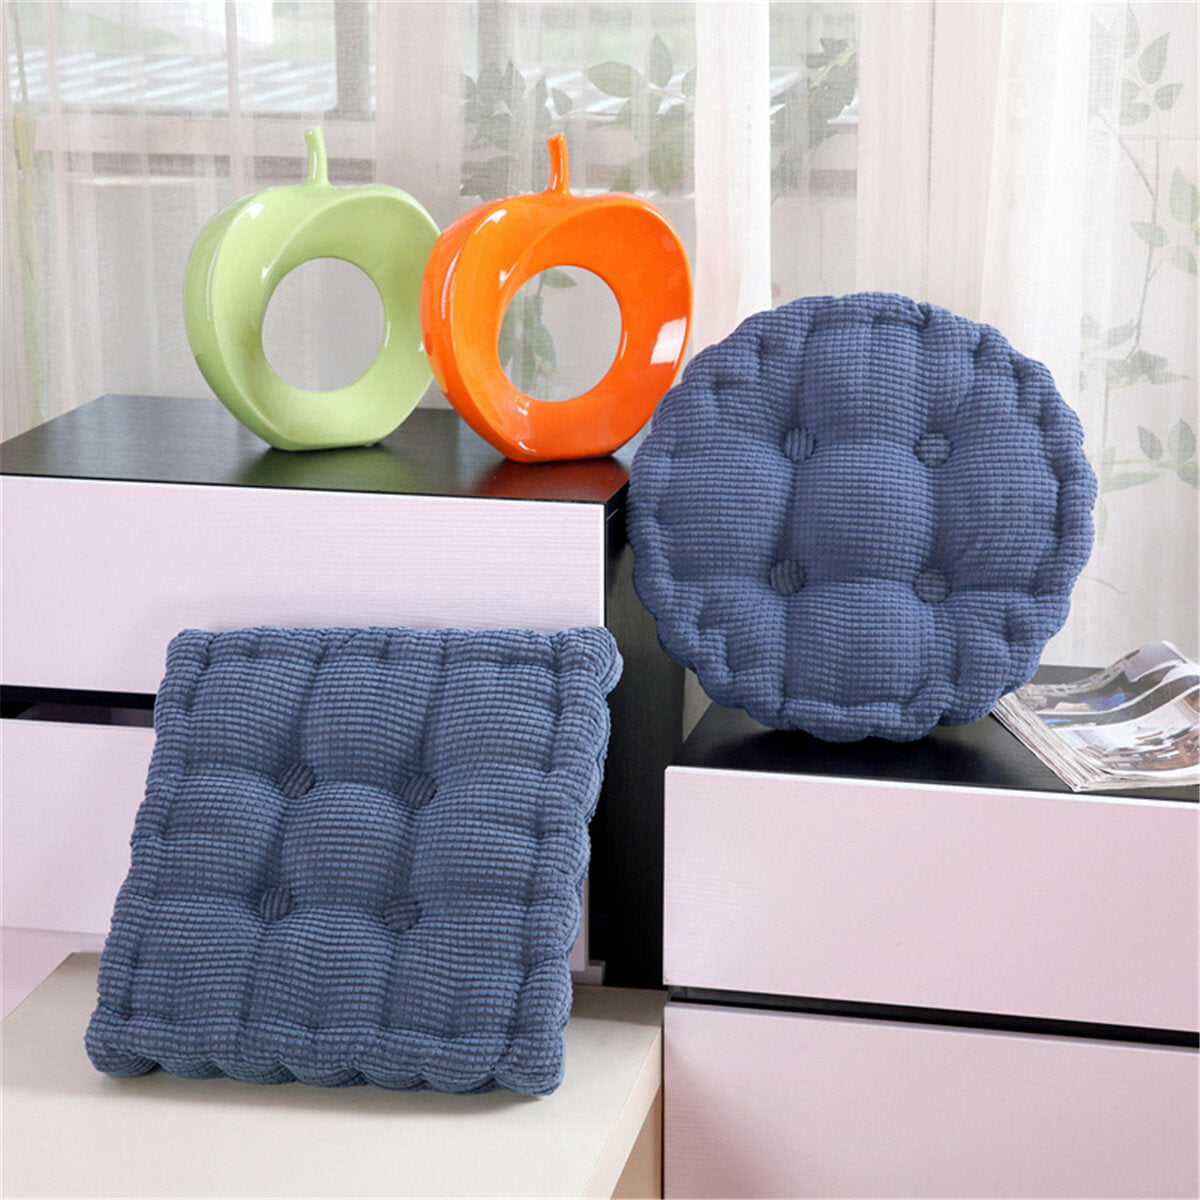 Square Round Seat Cushion Corduroy Indoor Outdoor Home Office Ultra Soft Seat Back Cushion Chair Pad Sofa Mat